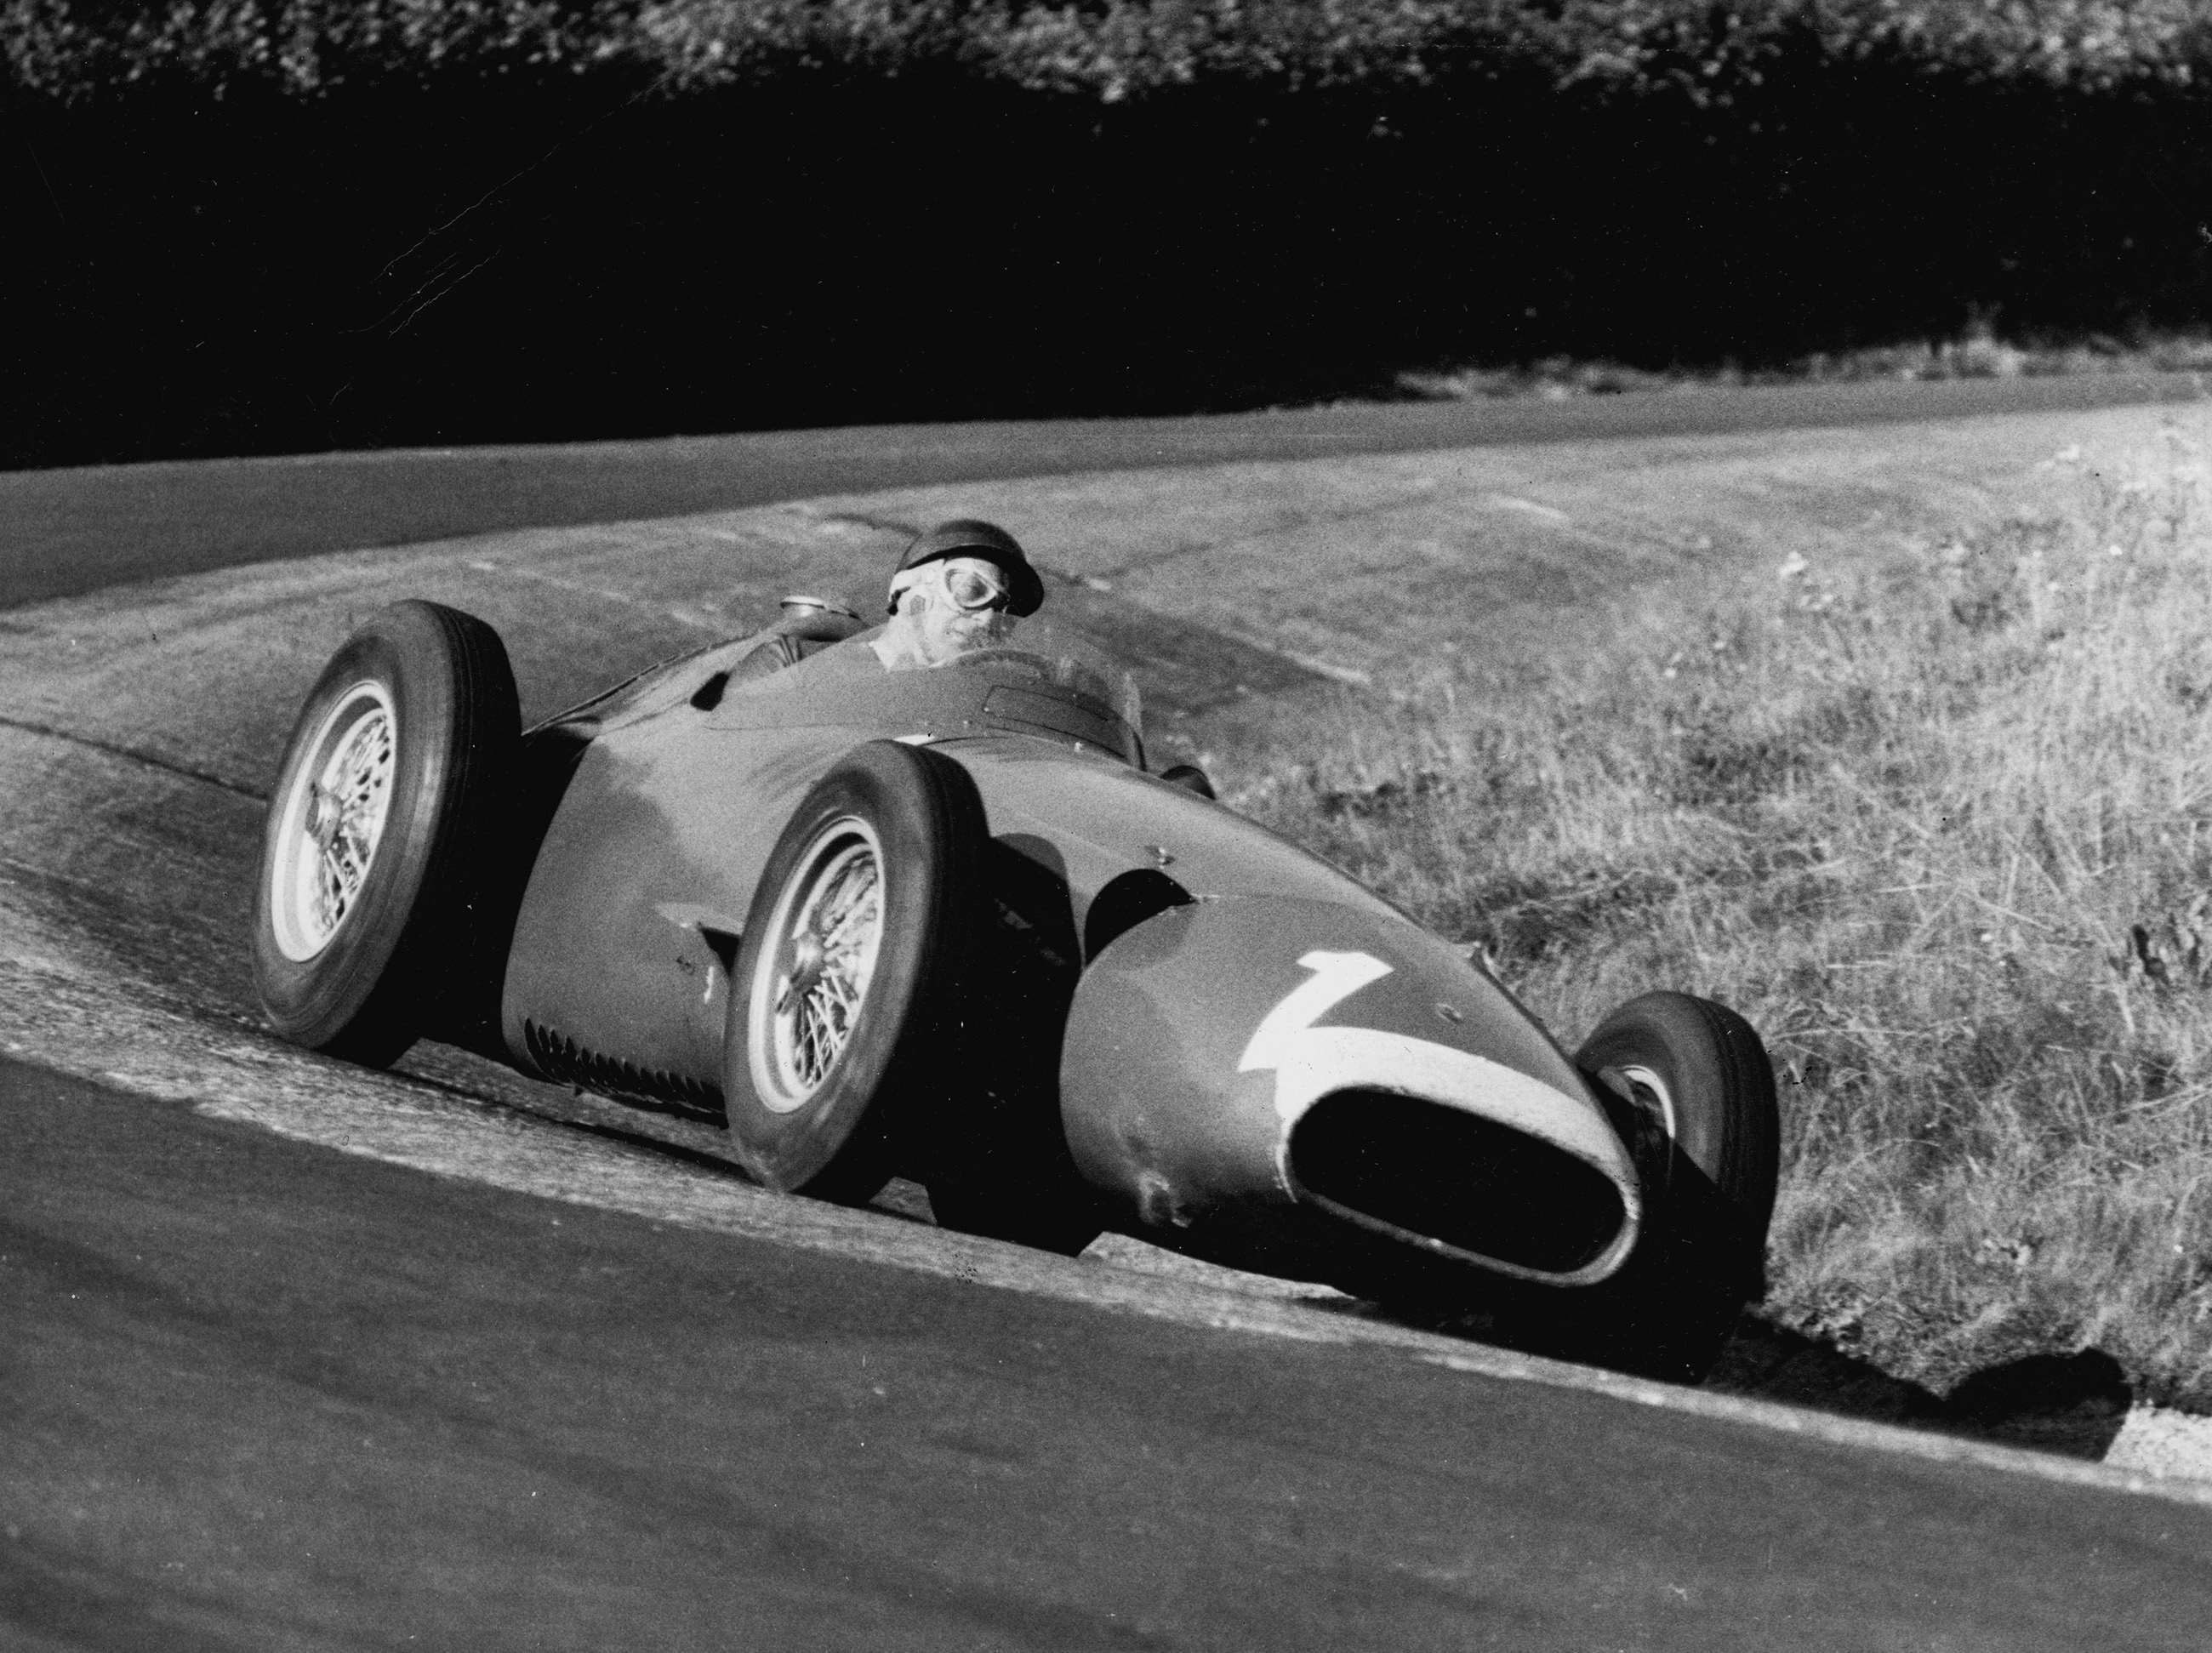 Back home again - Fangio was more comfortable back with Maserati for 1957, clinching his fifth and final World Championship title in this works ‘Lightweight’ 250F after a legendarily brilliant come-back drive in the German GP